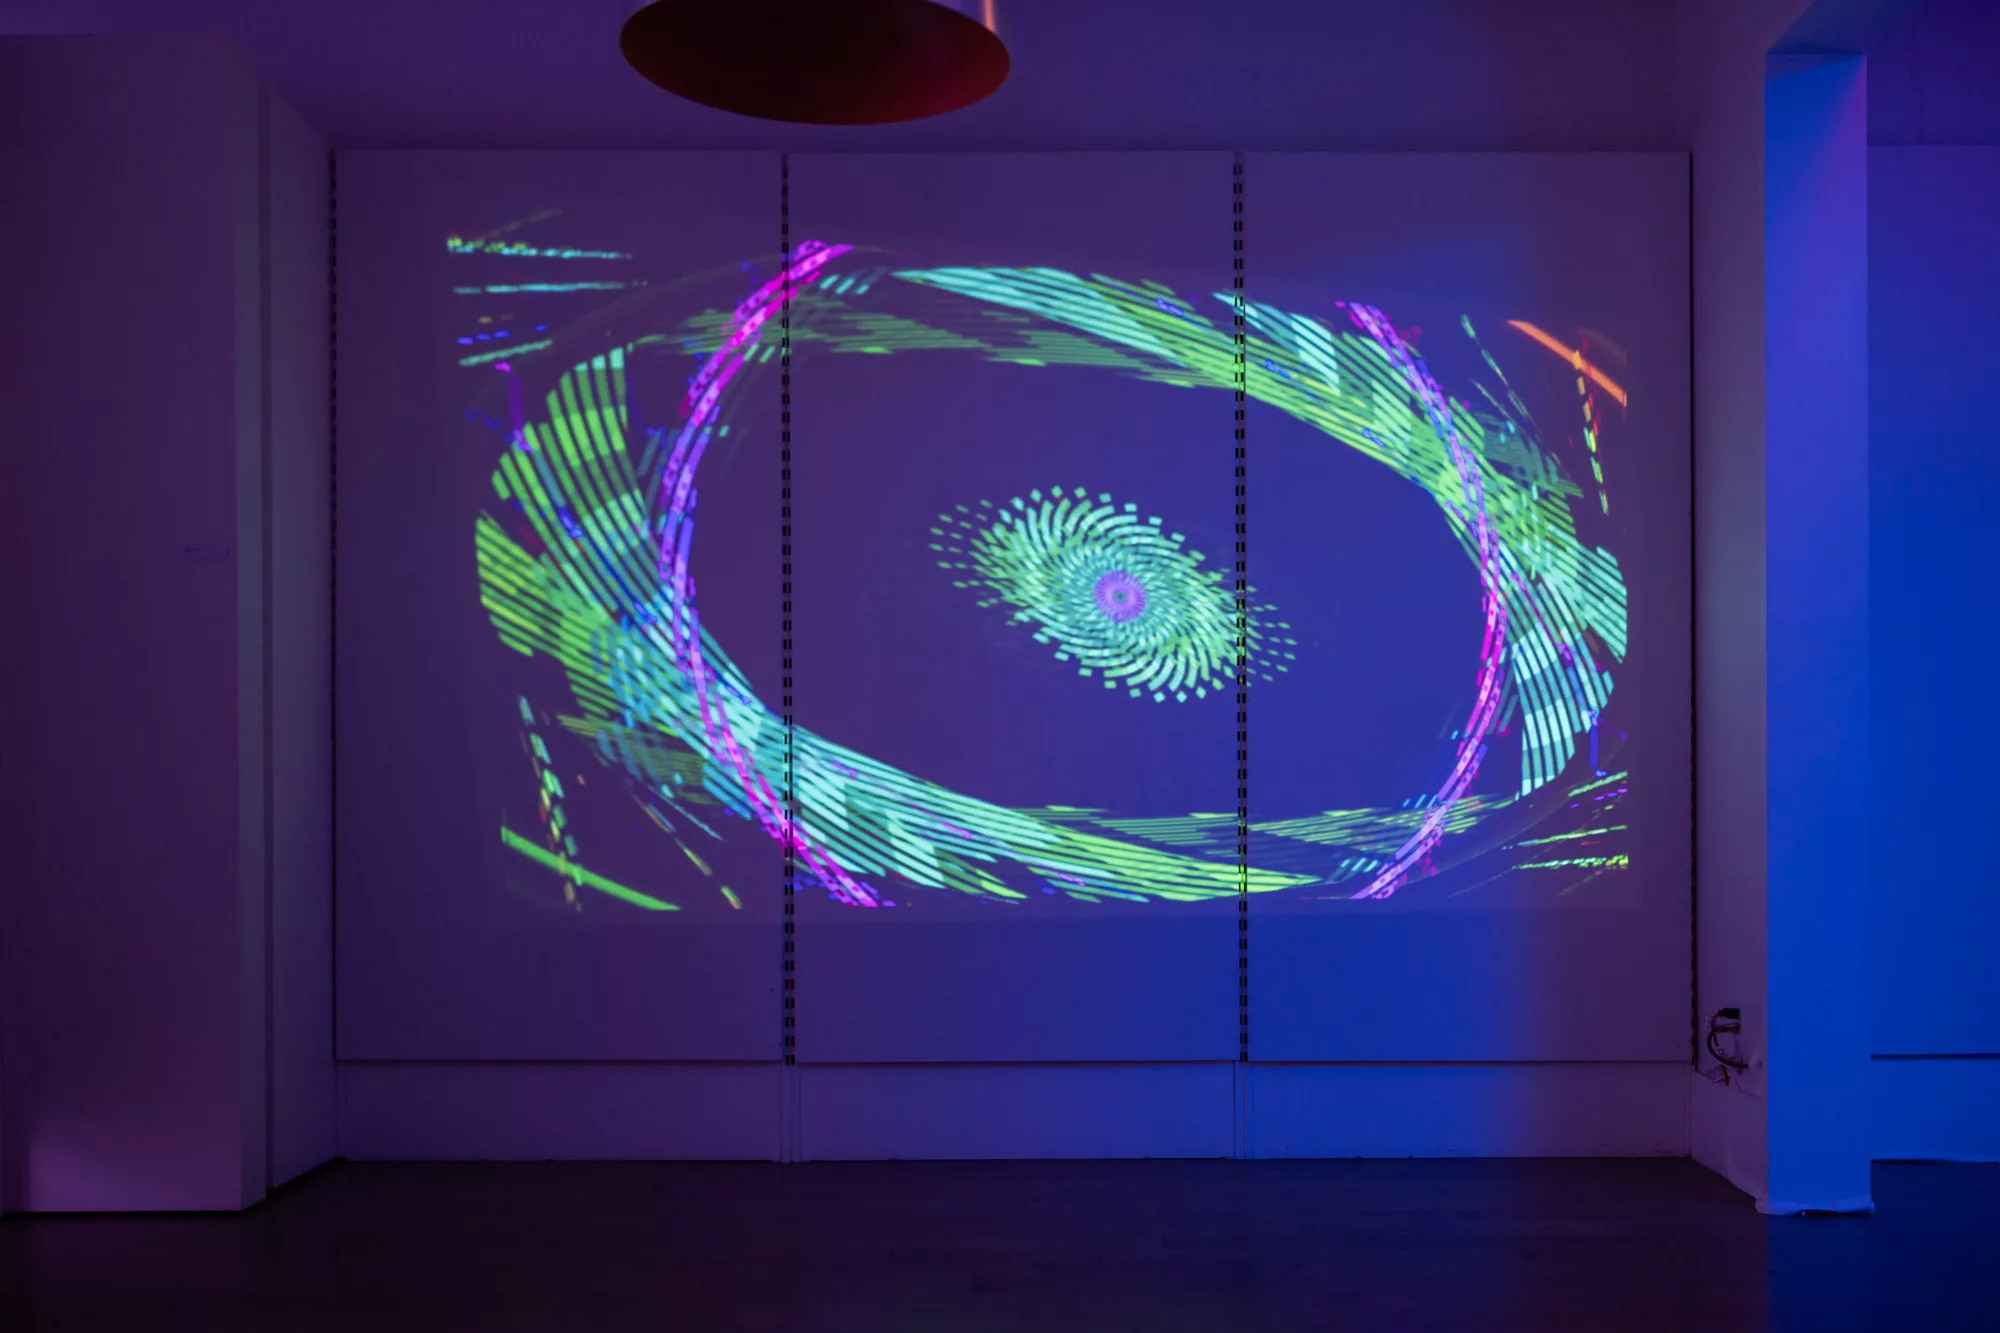 A projected video with abstract patterns in blue, purple, and green. The lines overlap and curve into a pointed oval. A second oval sits in the middle, like a pupil and iris of an eye.